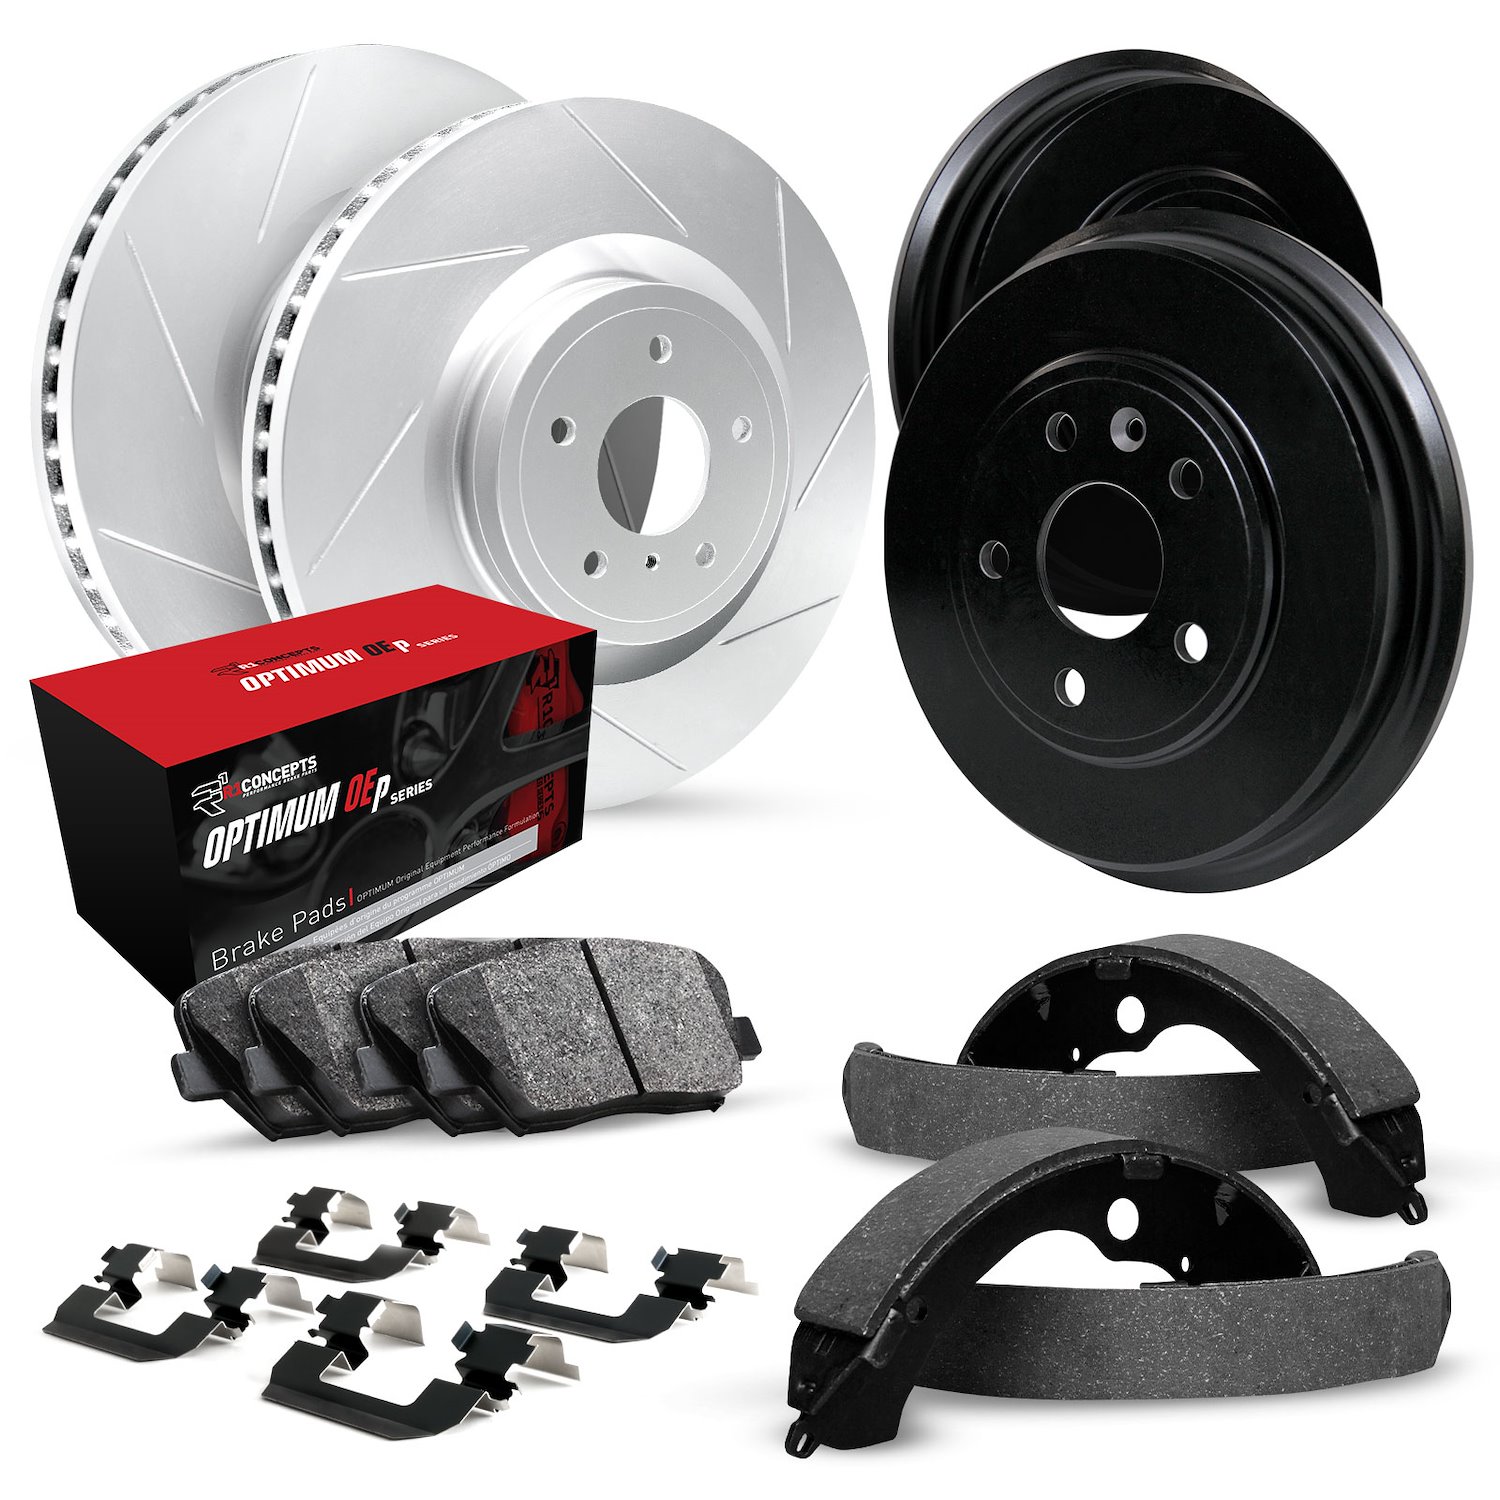 GEO-Carbon Slotted Brake Rotor & Drum Set w/Optimum OE Pads, Shoes, & Hardware, 1994-1996 GM, Position: Front & Rear